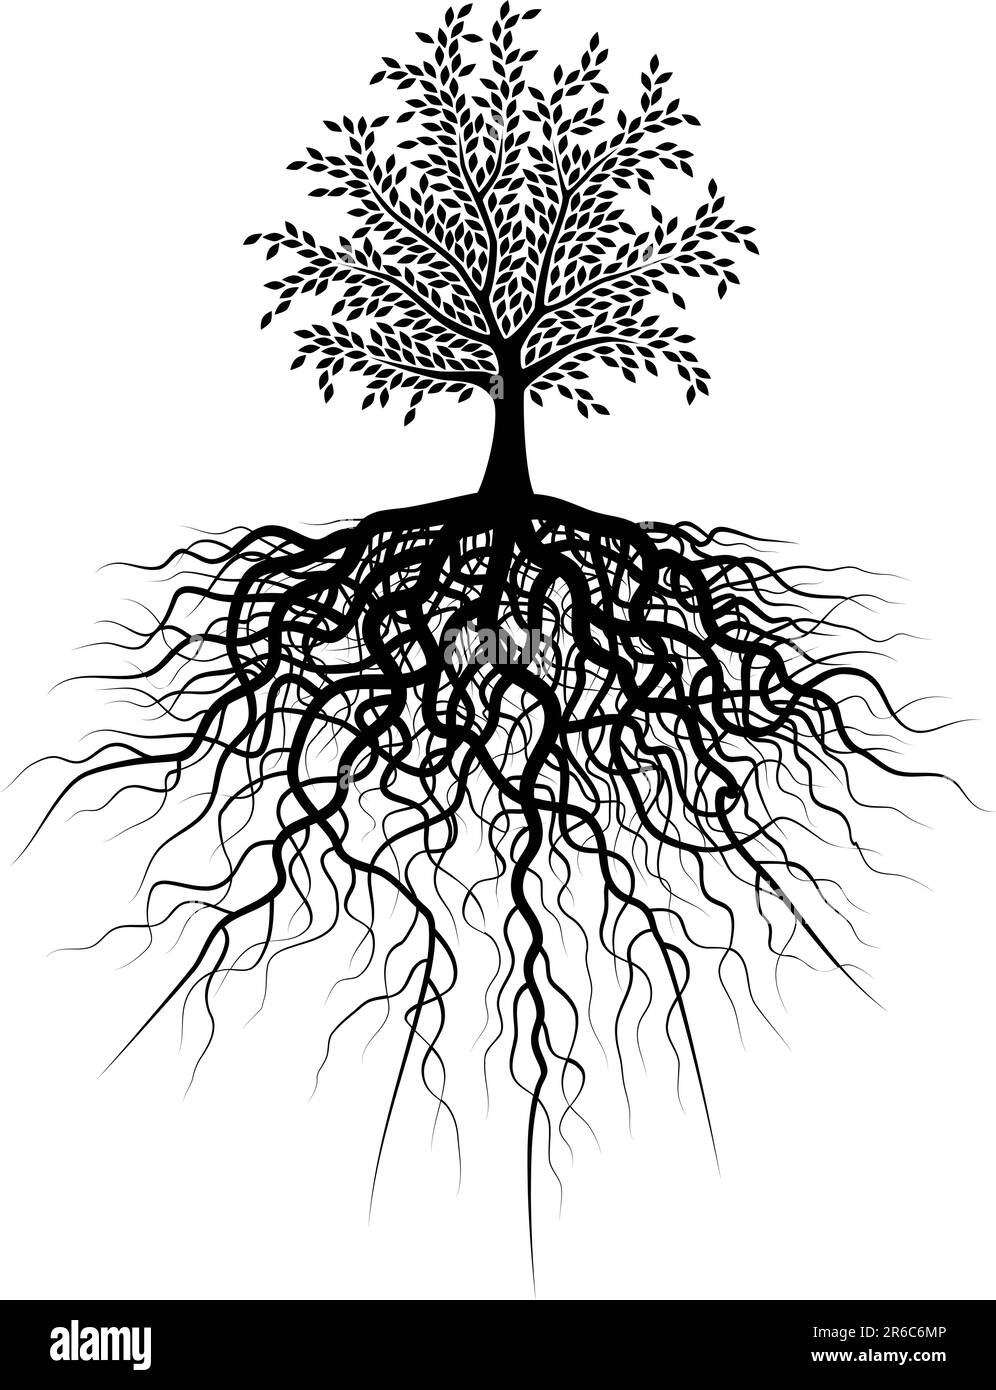 Editable vector illustration of a tree and its roots Stock Vector